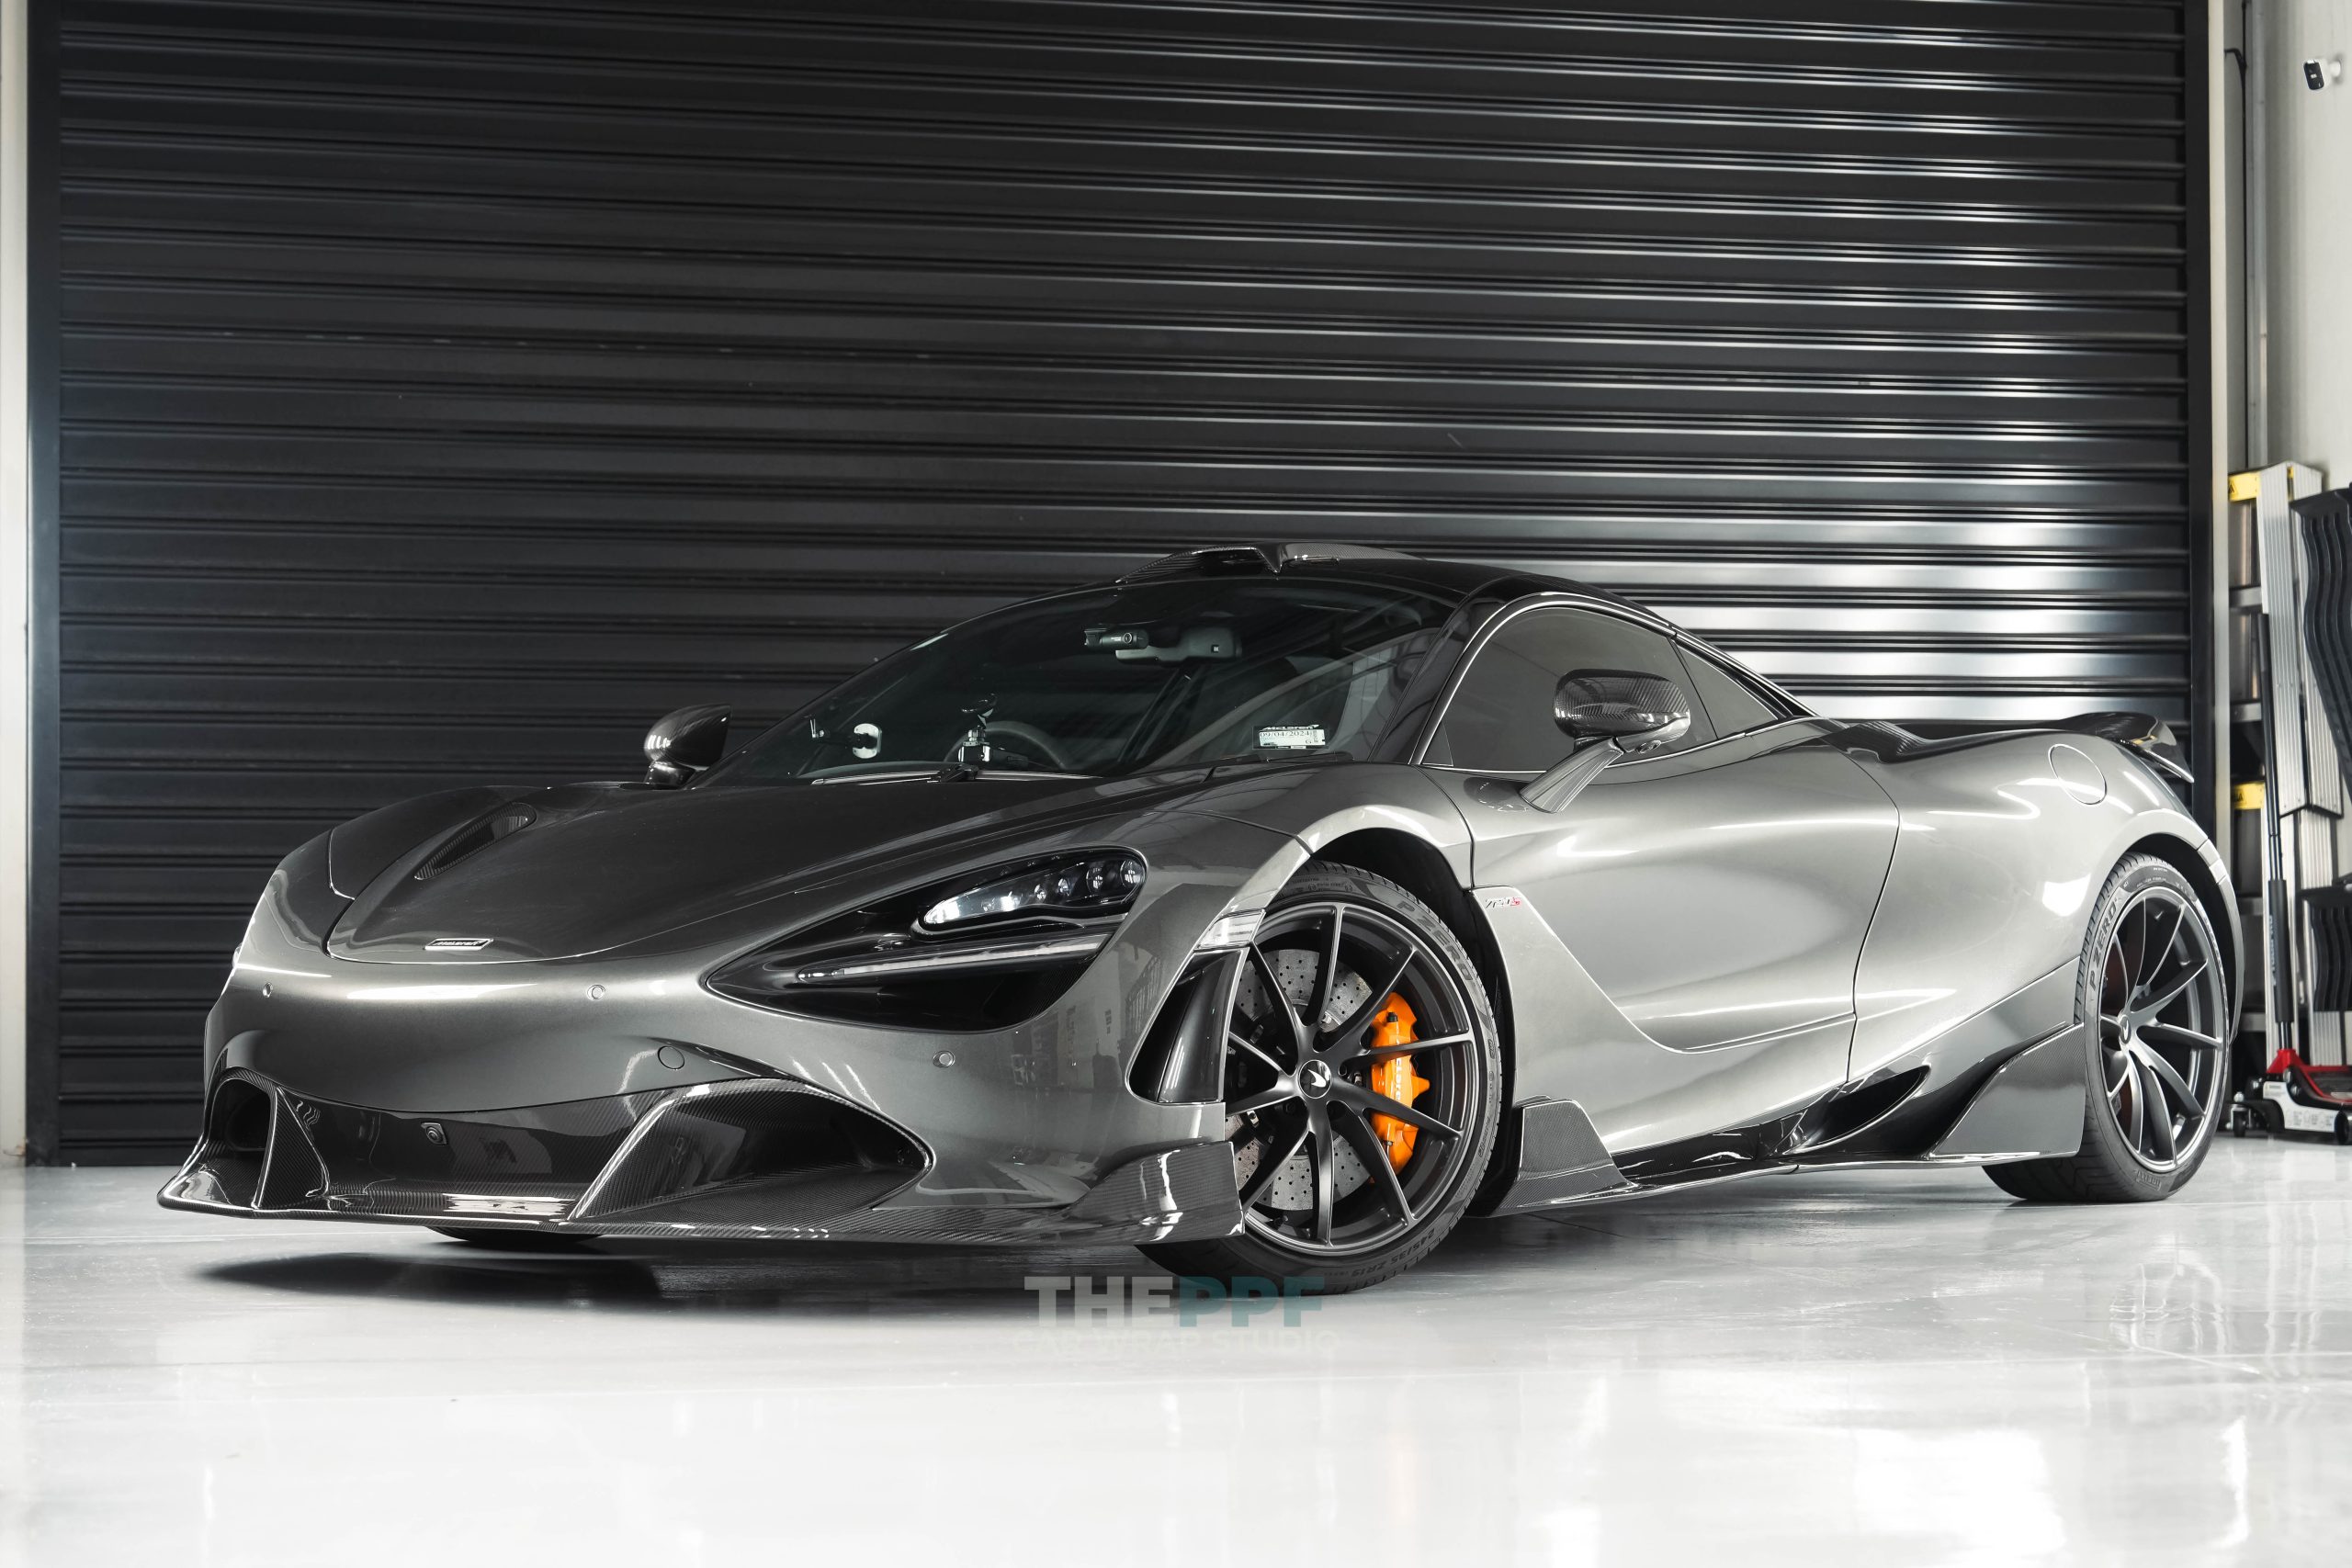 the ppf mclaren 720s super car paint protection film wrapping auckland